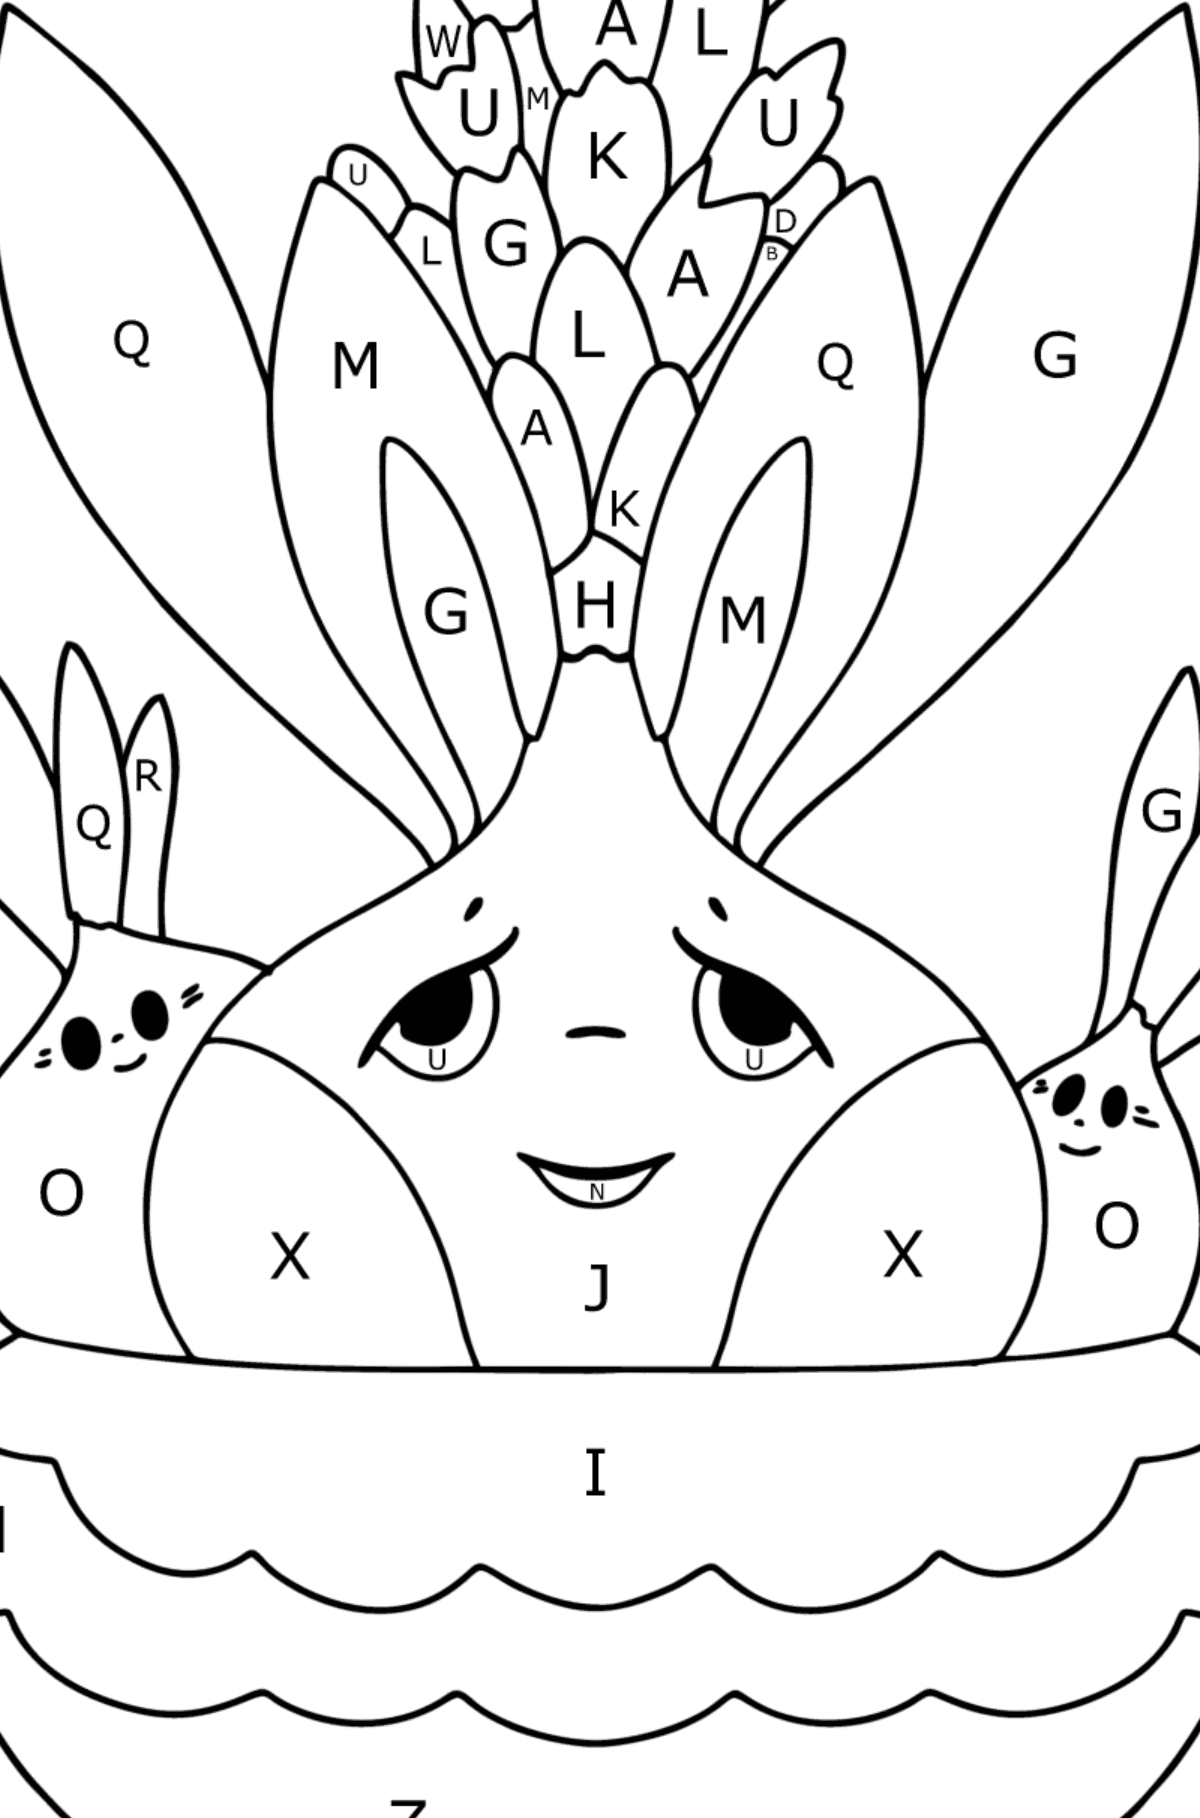 Hyacinth flowers with eyes coloring page - Coloring by Letters for Kids